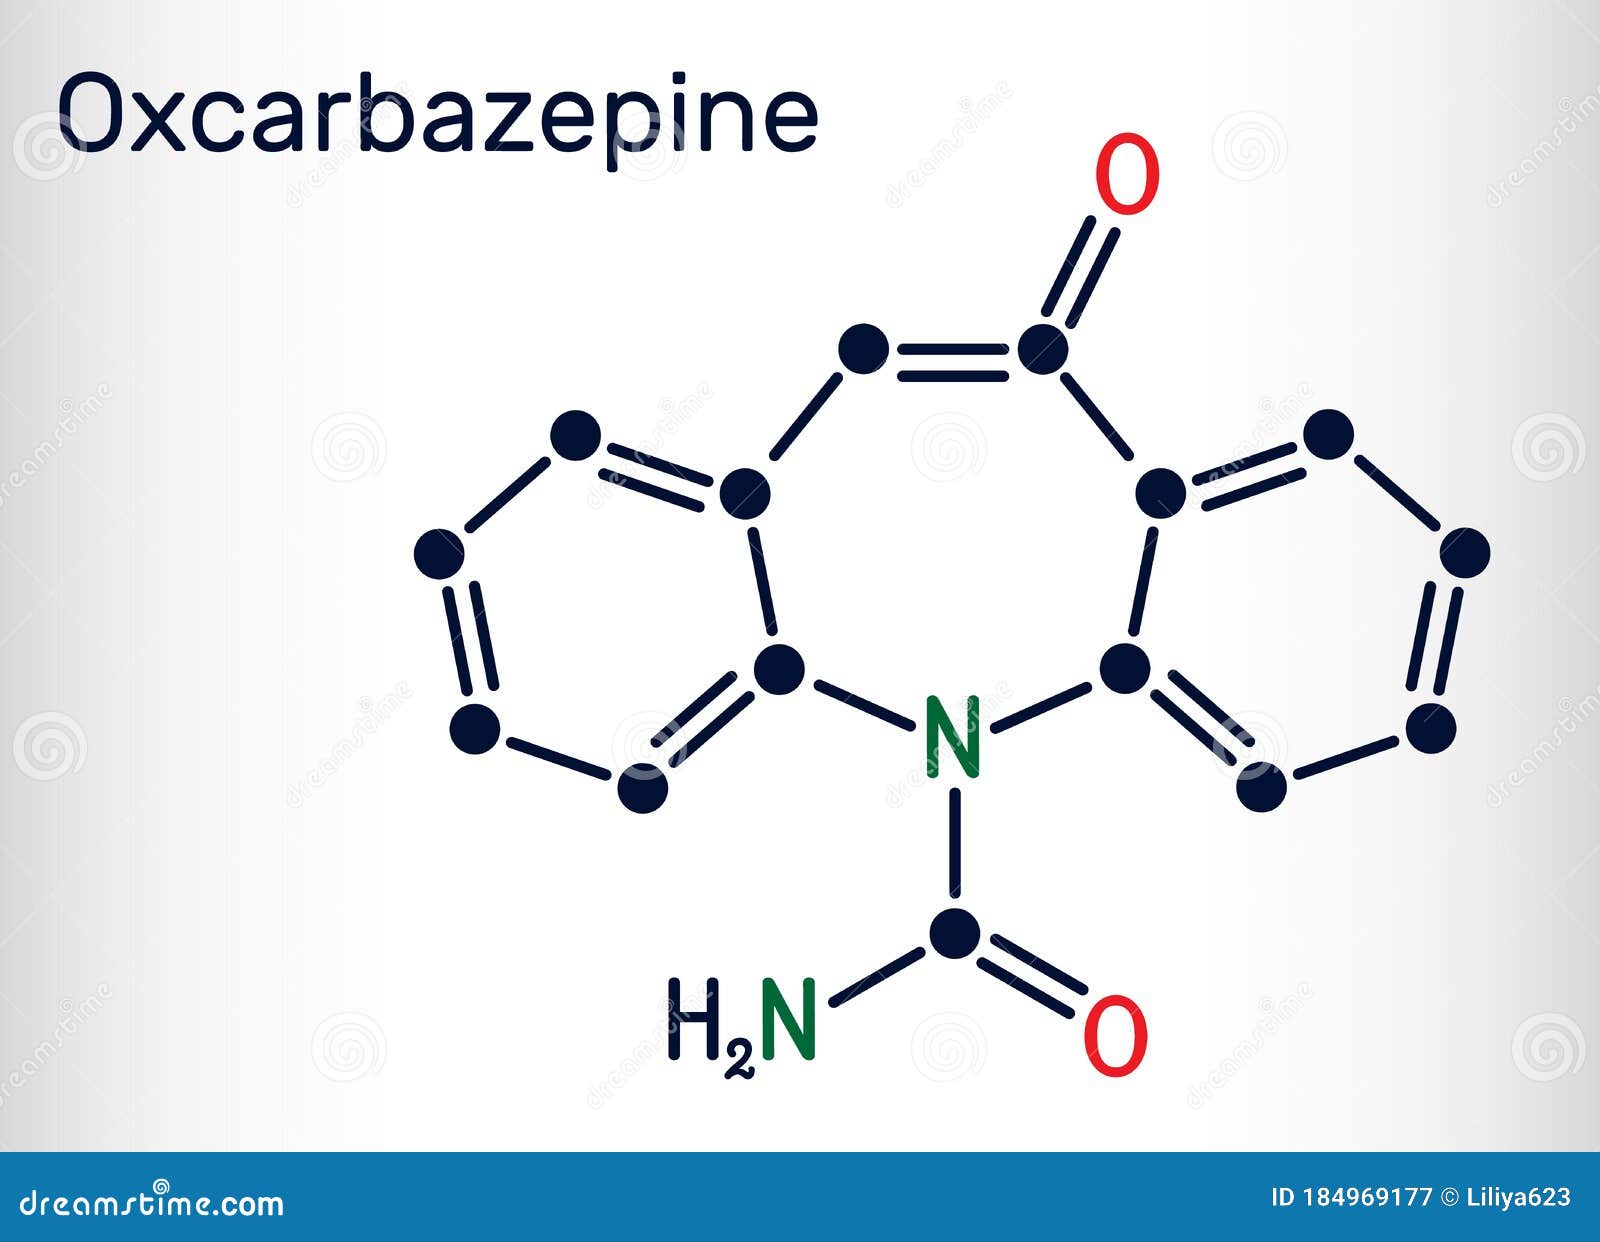 oxcarbazepine, c15h12n2o2 molecule. it is antiepileptic, anticonvulsant drug used in treatment of seizures, epilepsy, bipolar